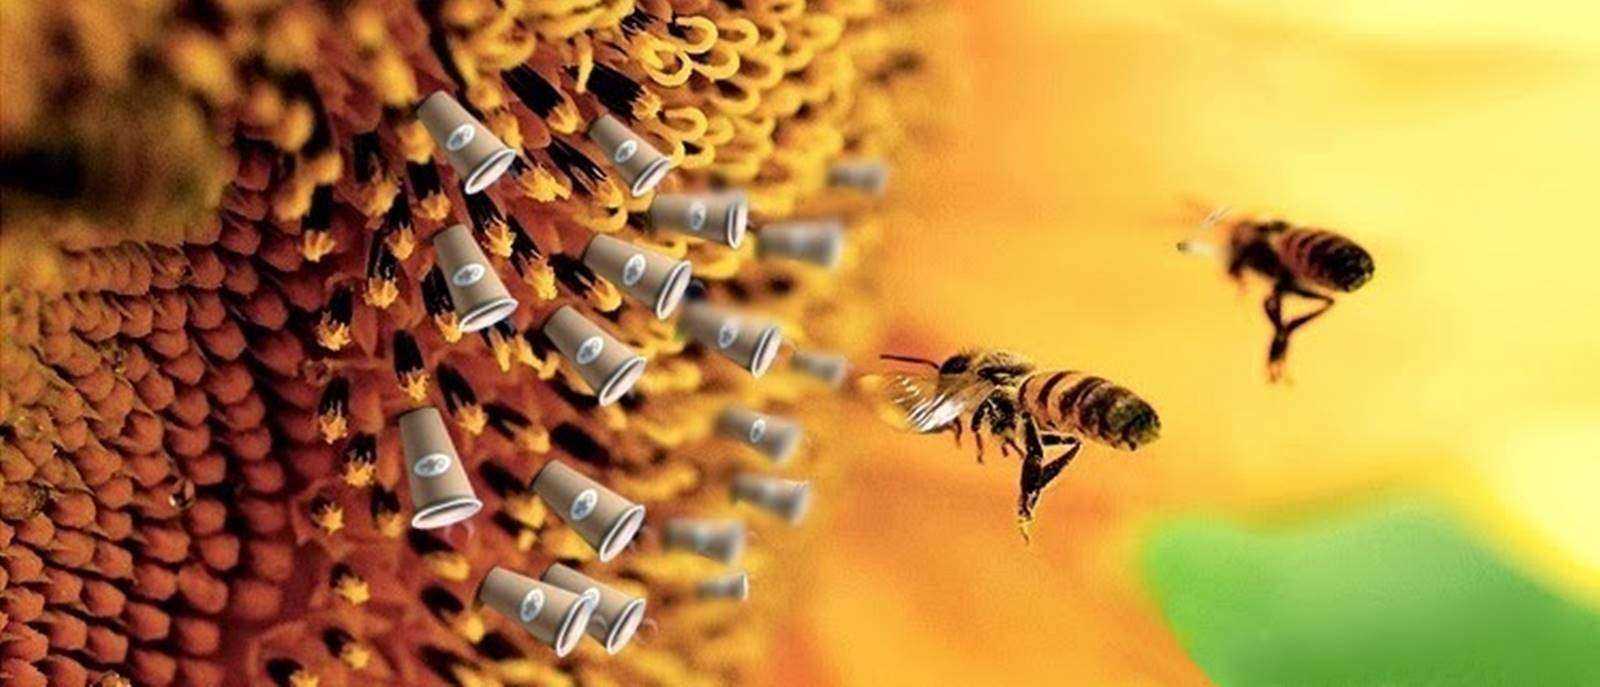 Bees Totally Addicted to Caffeine and Nicotine